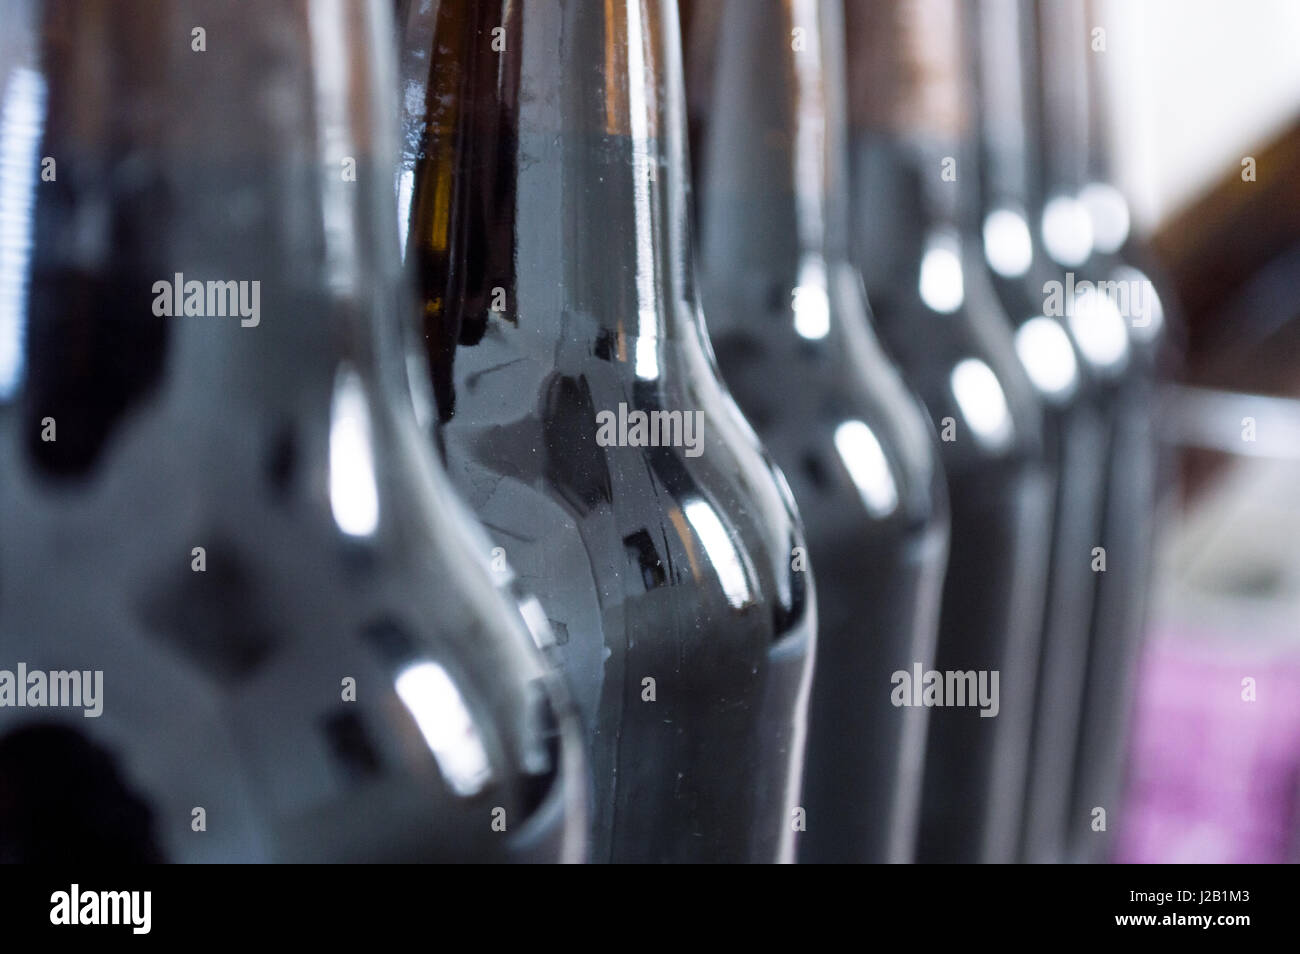 Beer Bottles in a Row Close Up Background Stock Photo